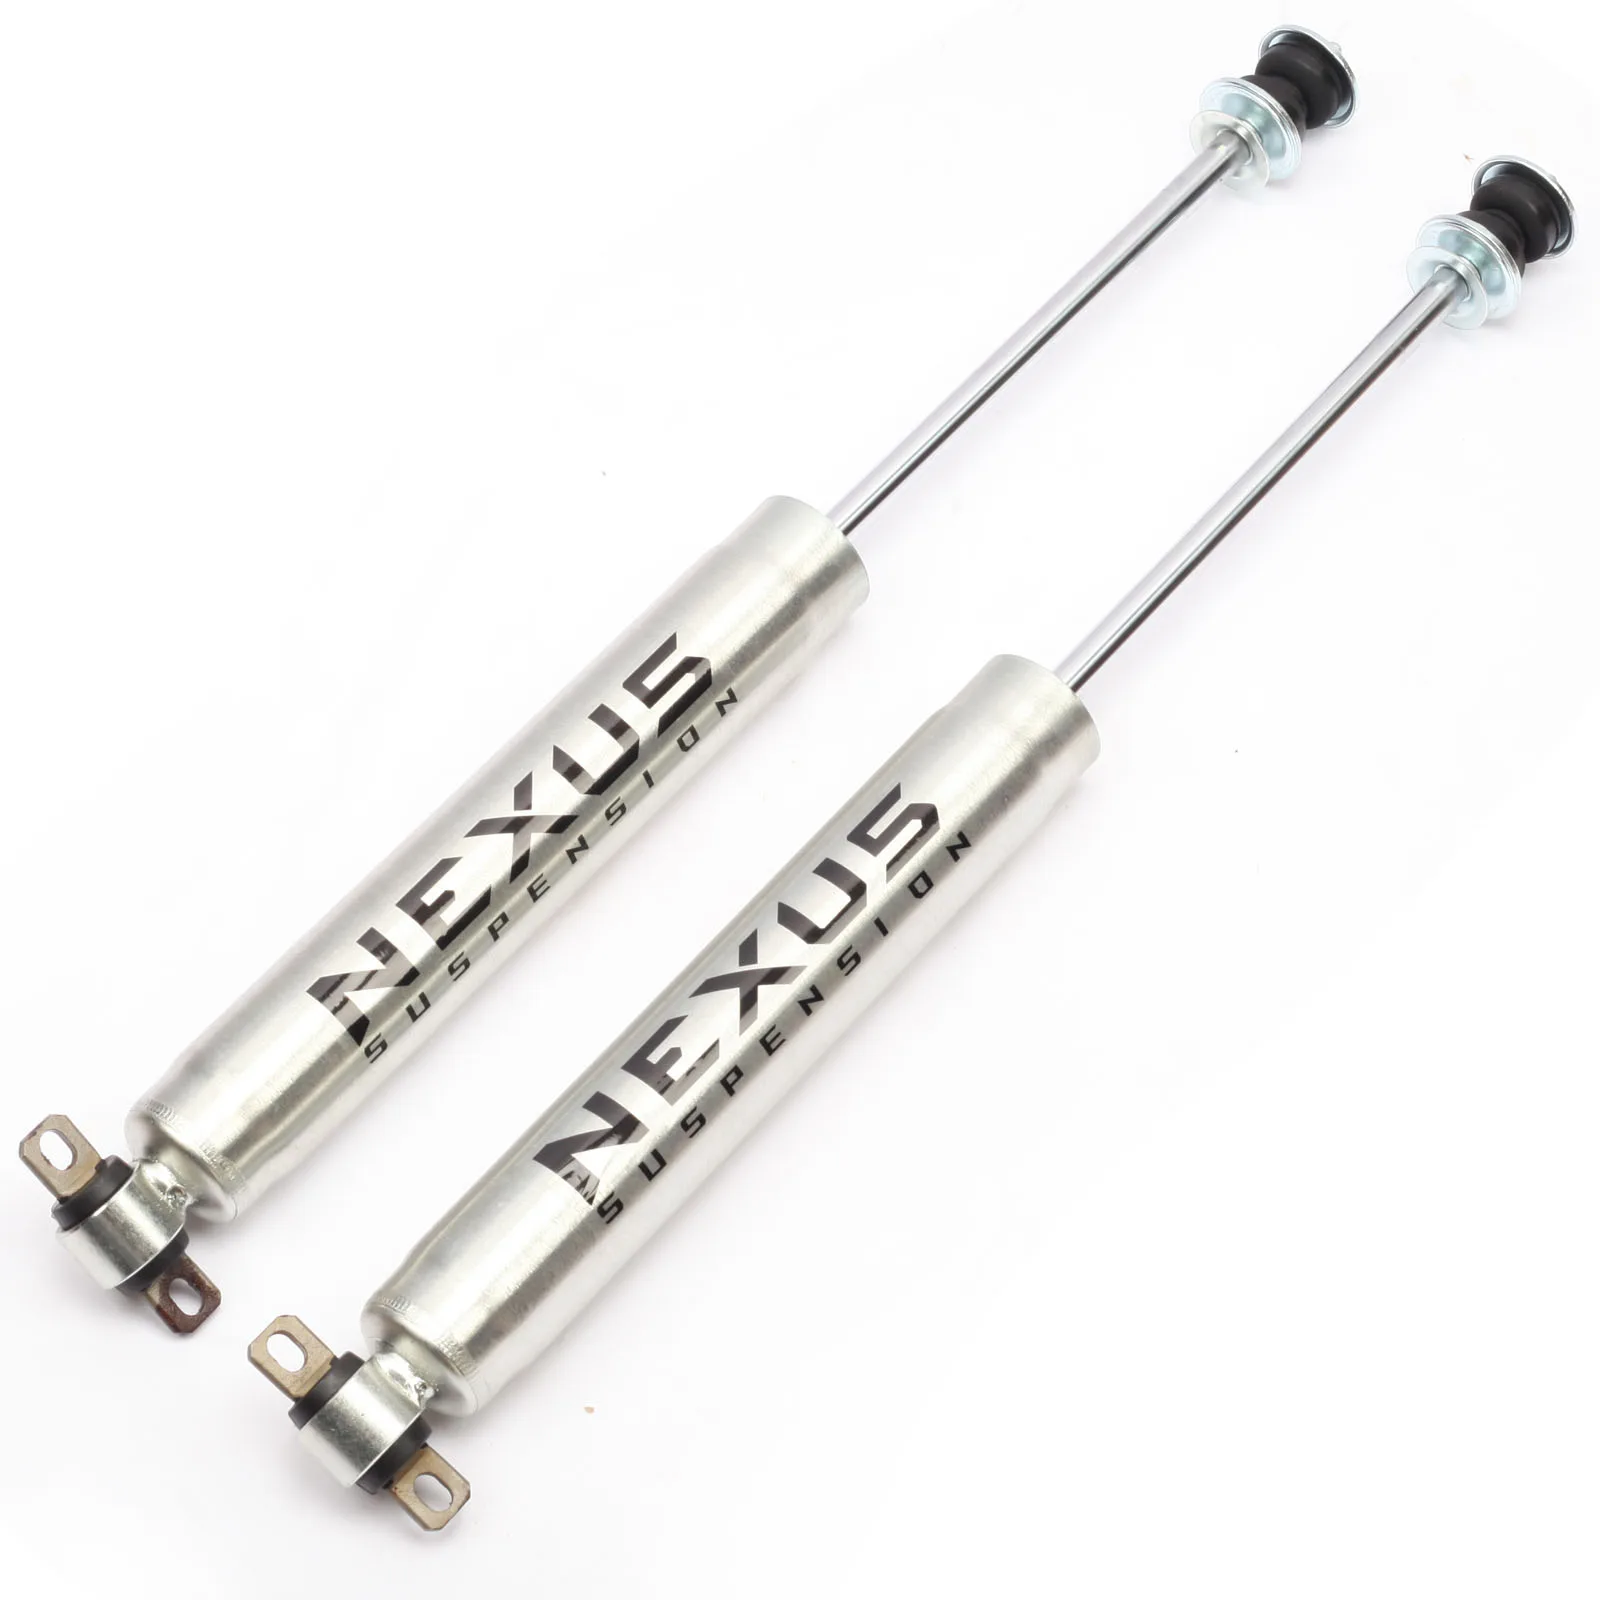 

4Inch Lift Front Shock Absorber For Jeep Grand Cherokee WJ 1999-2004 Suspension Lift 0-4" Pair Zinc Plated Coating